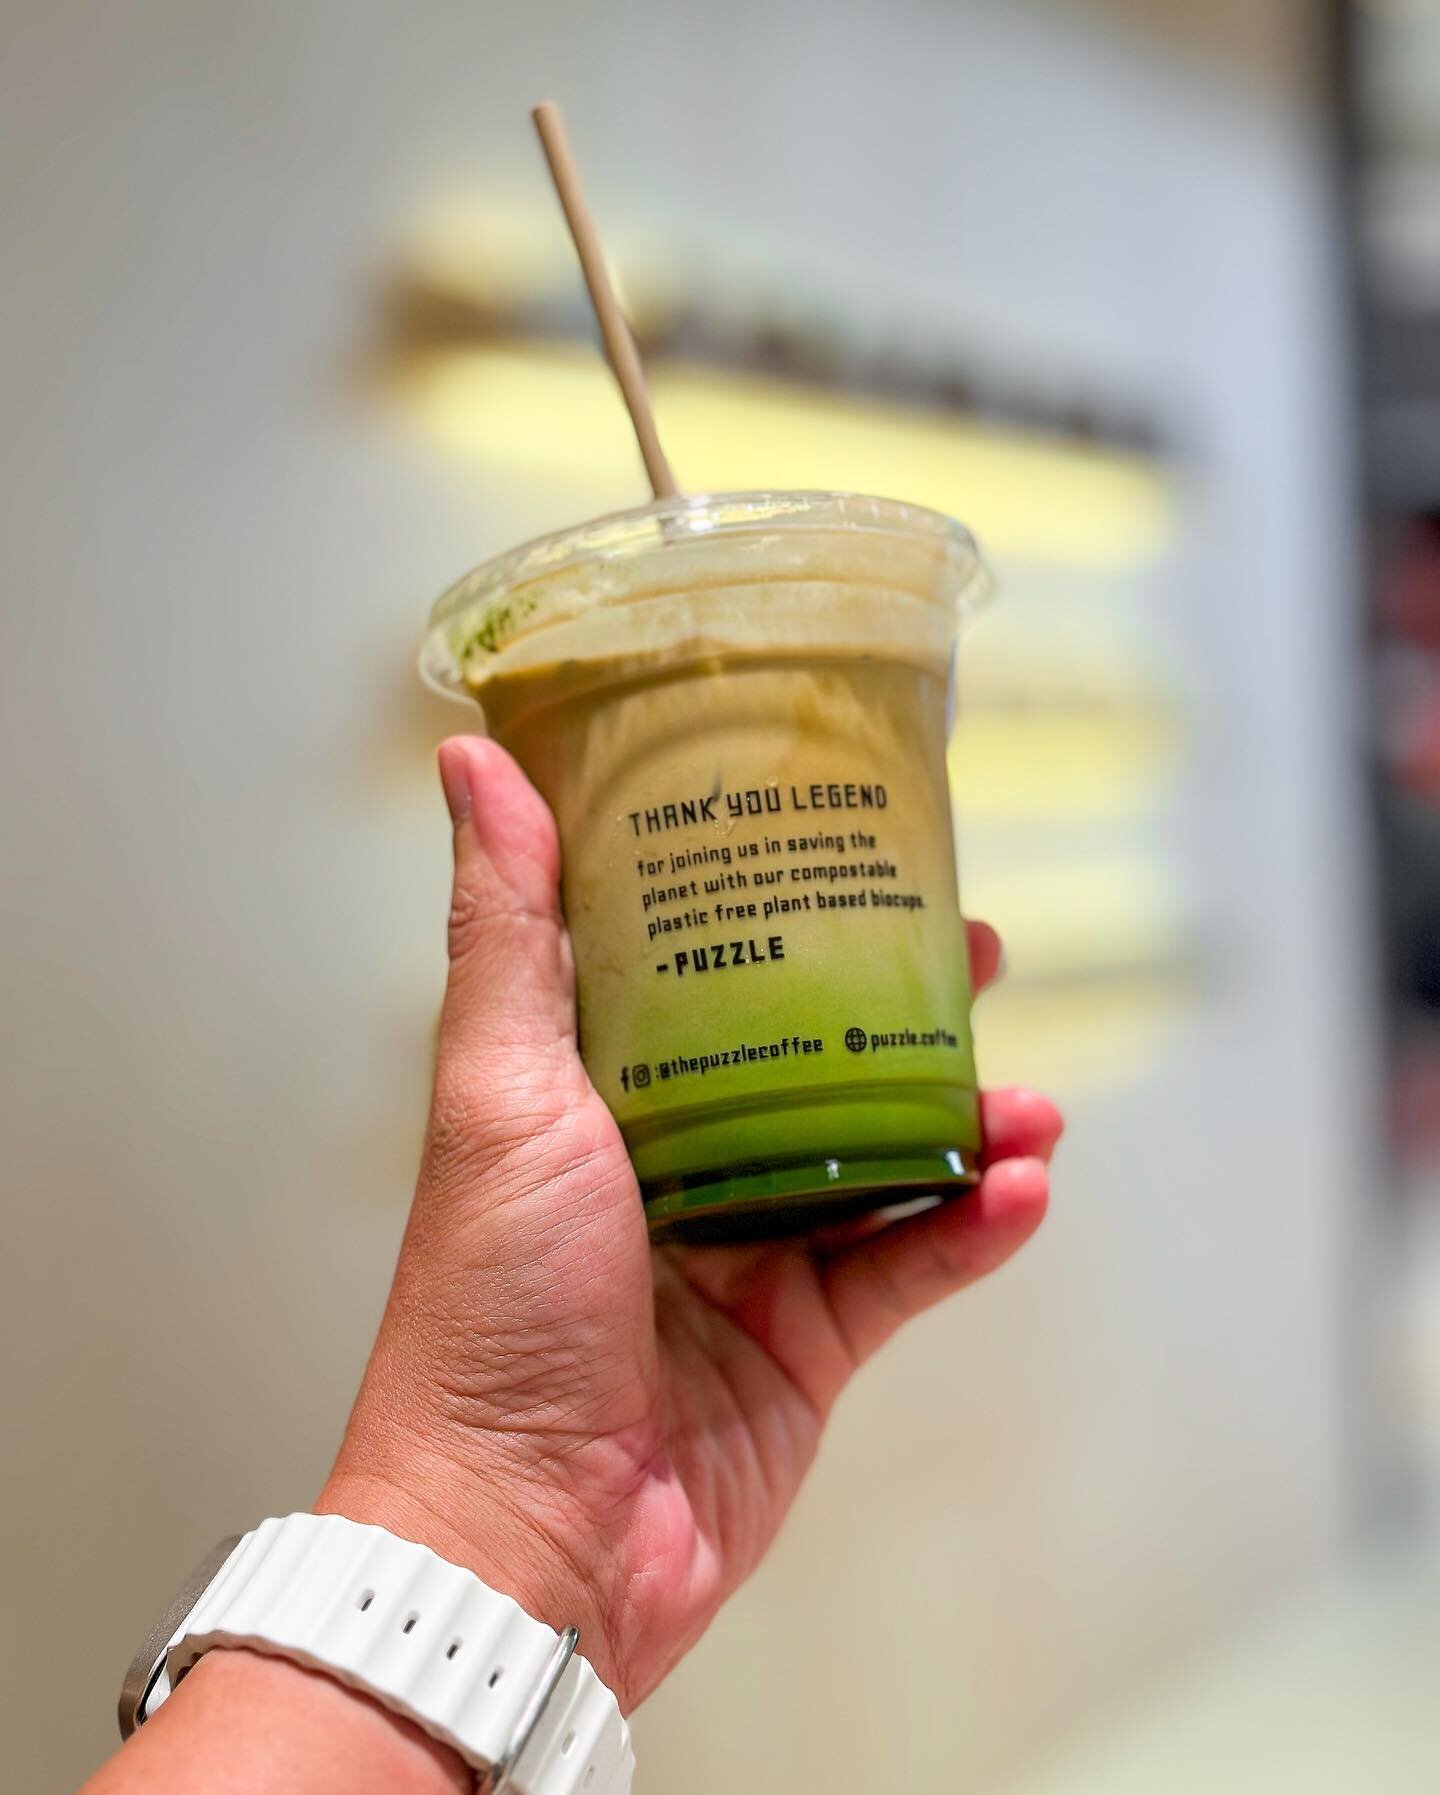 💚Iced #matchalatte kinda day. @ThePuzzleCoffee&rsquo;s version uses premium uji #matcha powder imported from Kyoto. #FindNewFood #puzzlecoffee